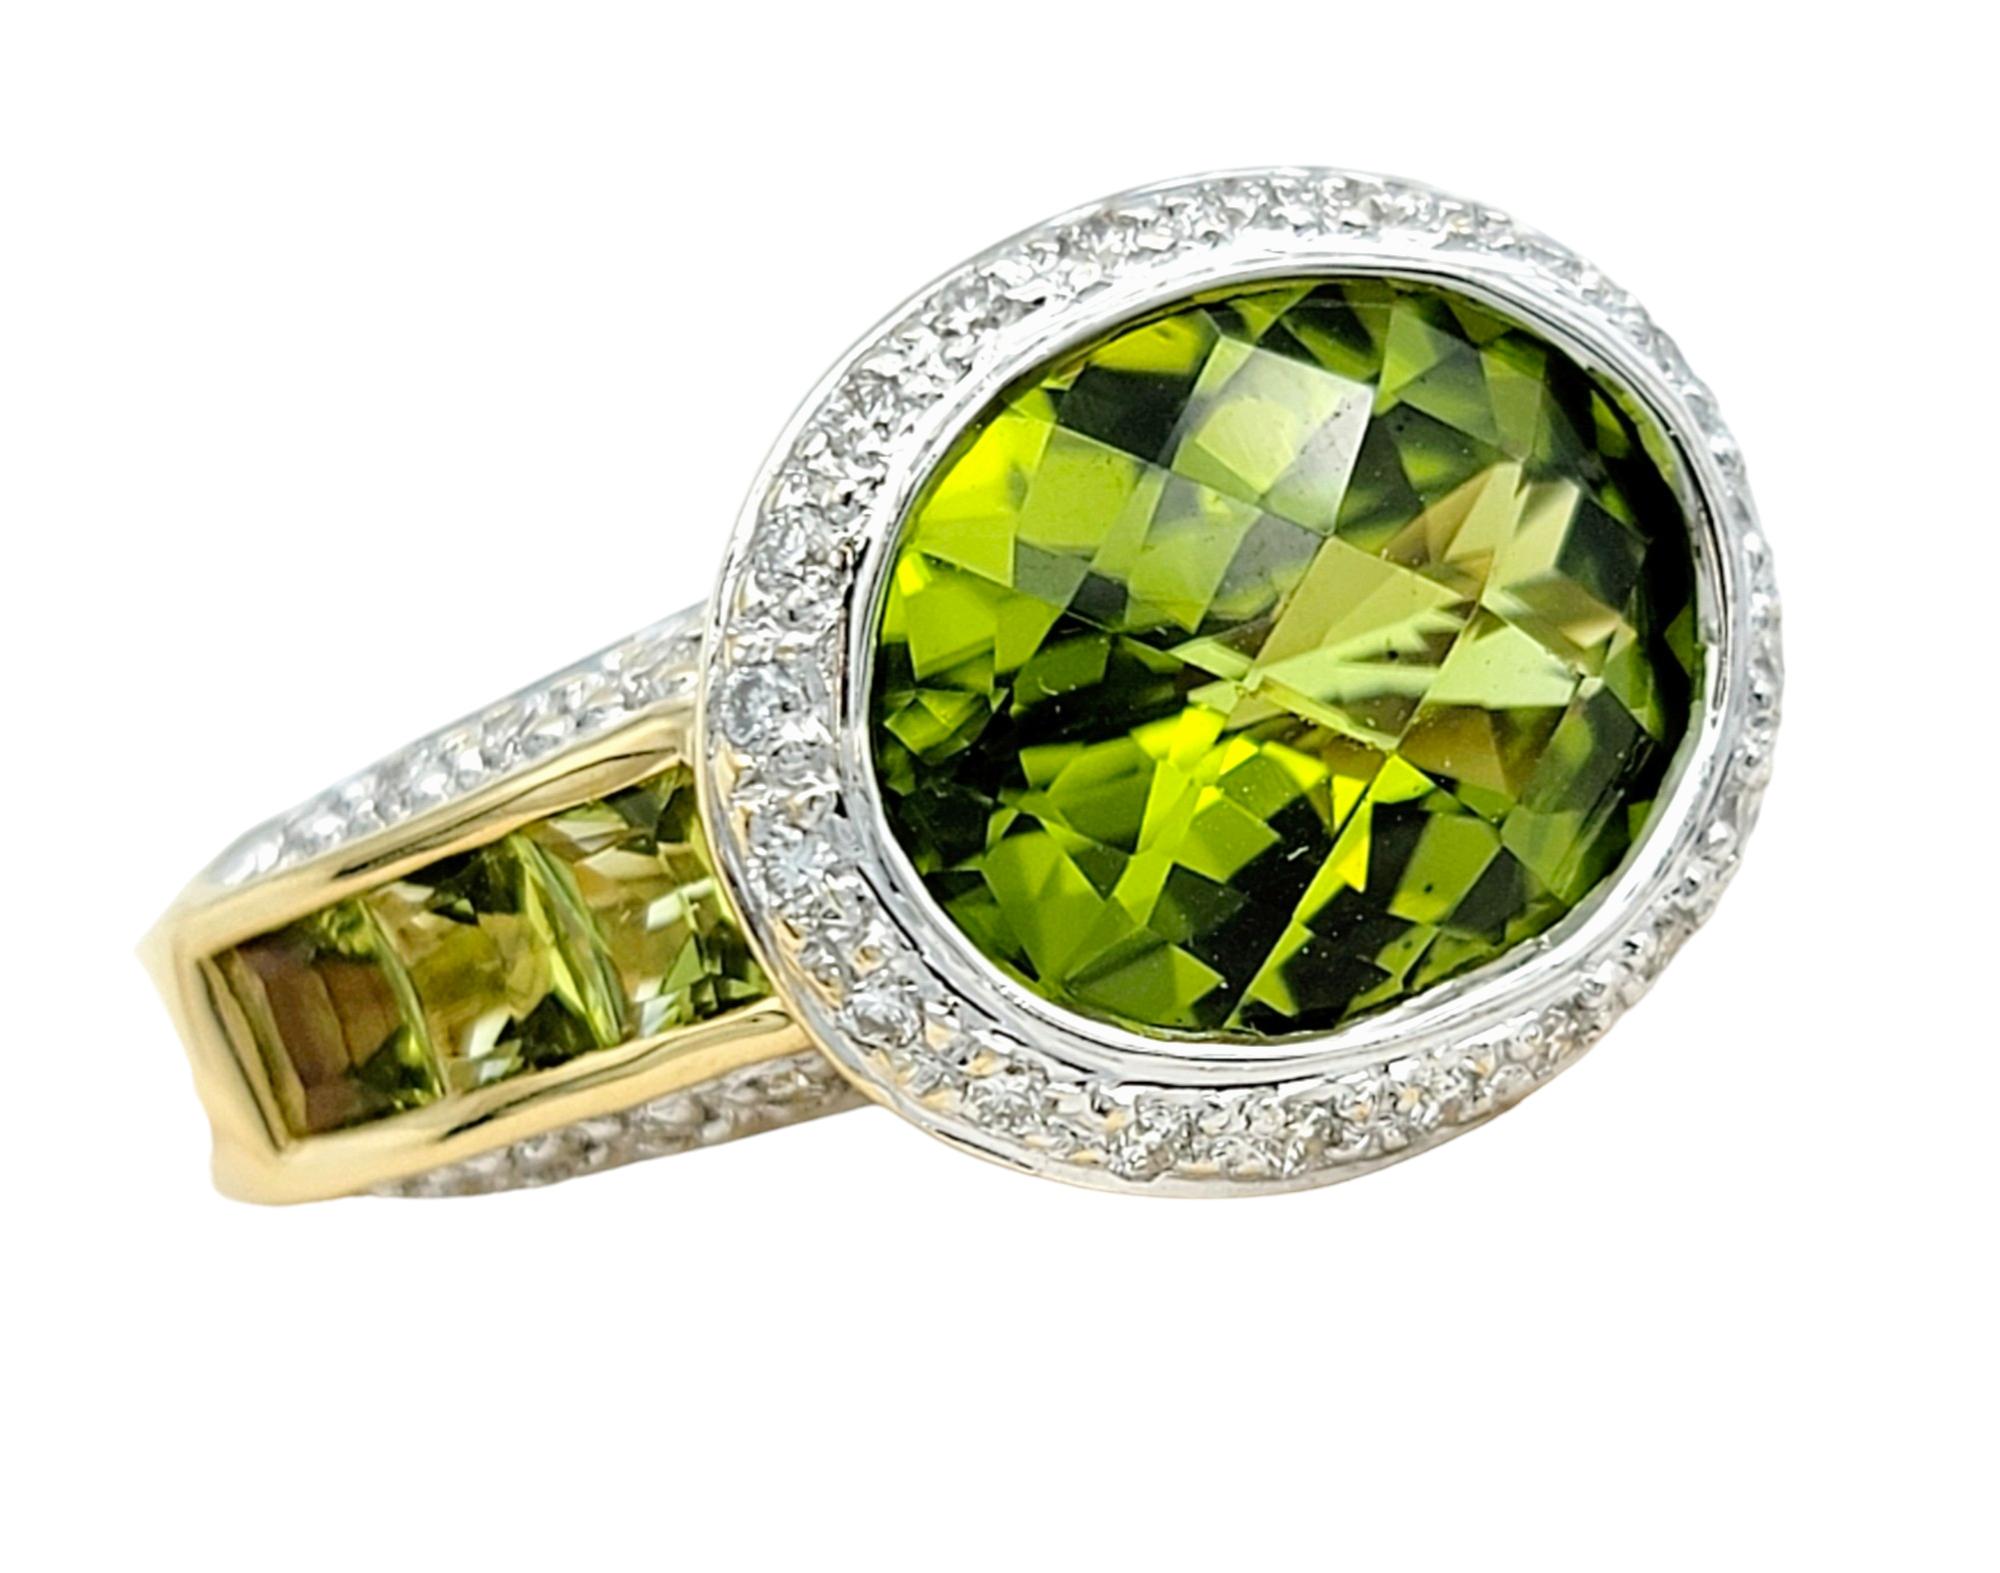 Bellarri Oval Cut Peridot and Pavé Diamond Ring Set in 18 Karat Yellow Gold In Good Condition For Sale In Scottsdale, AZ